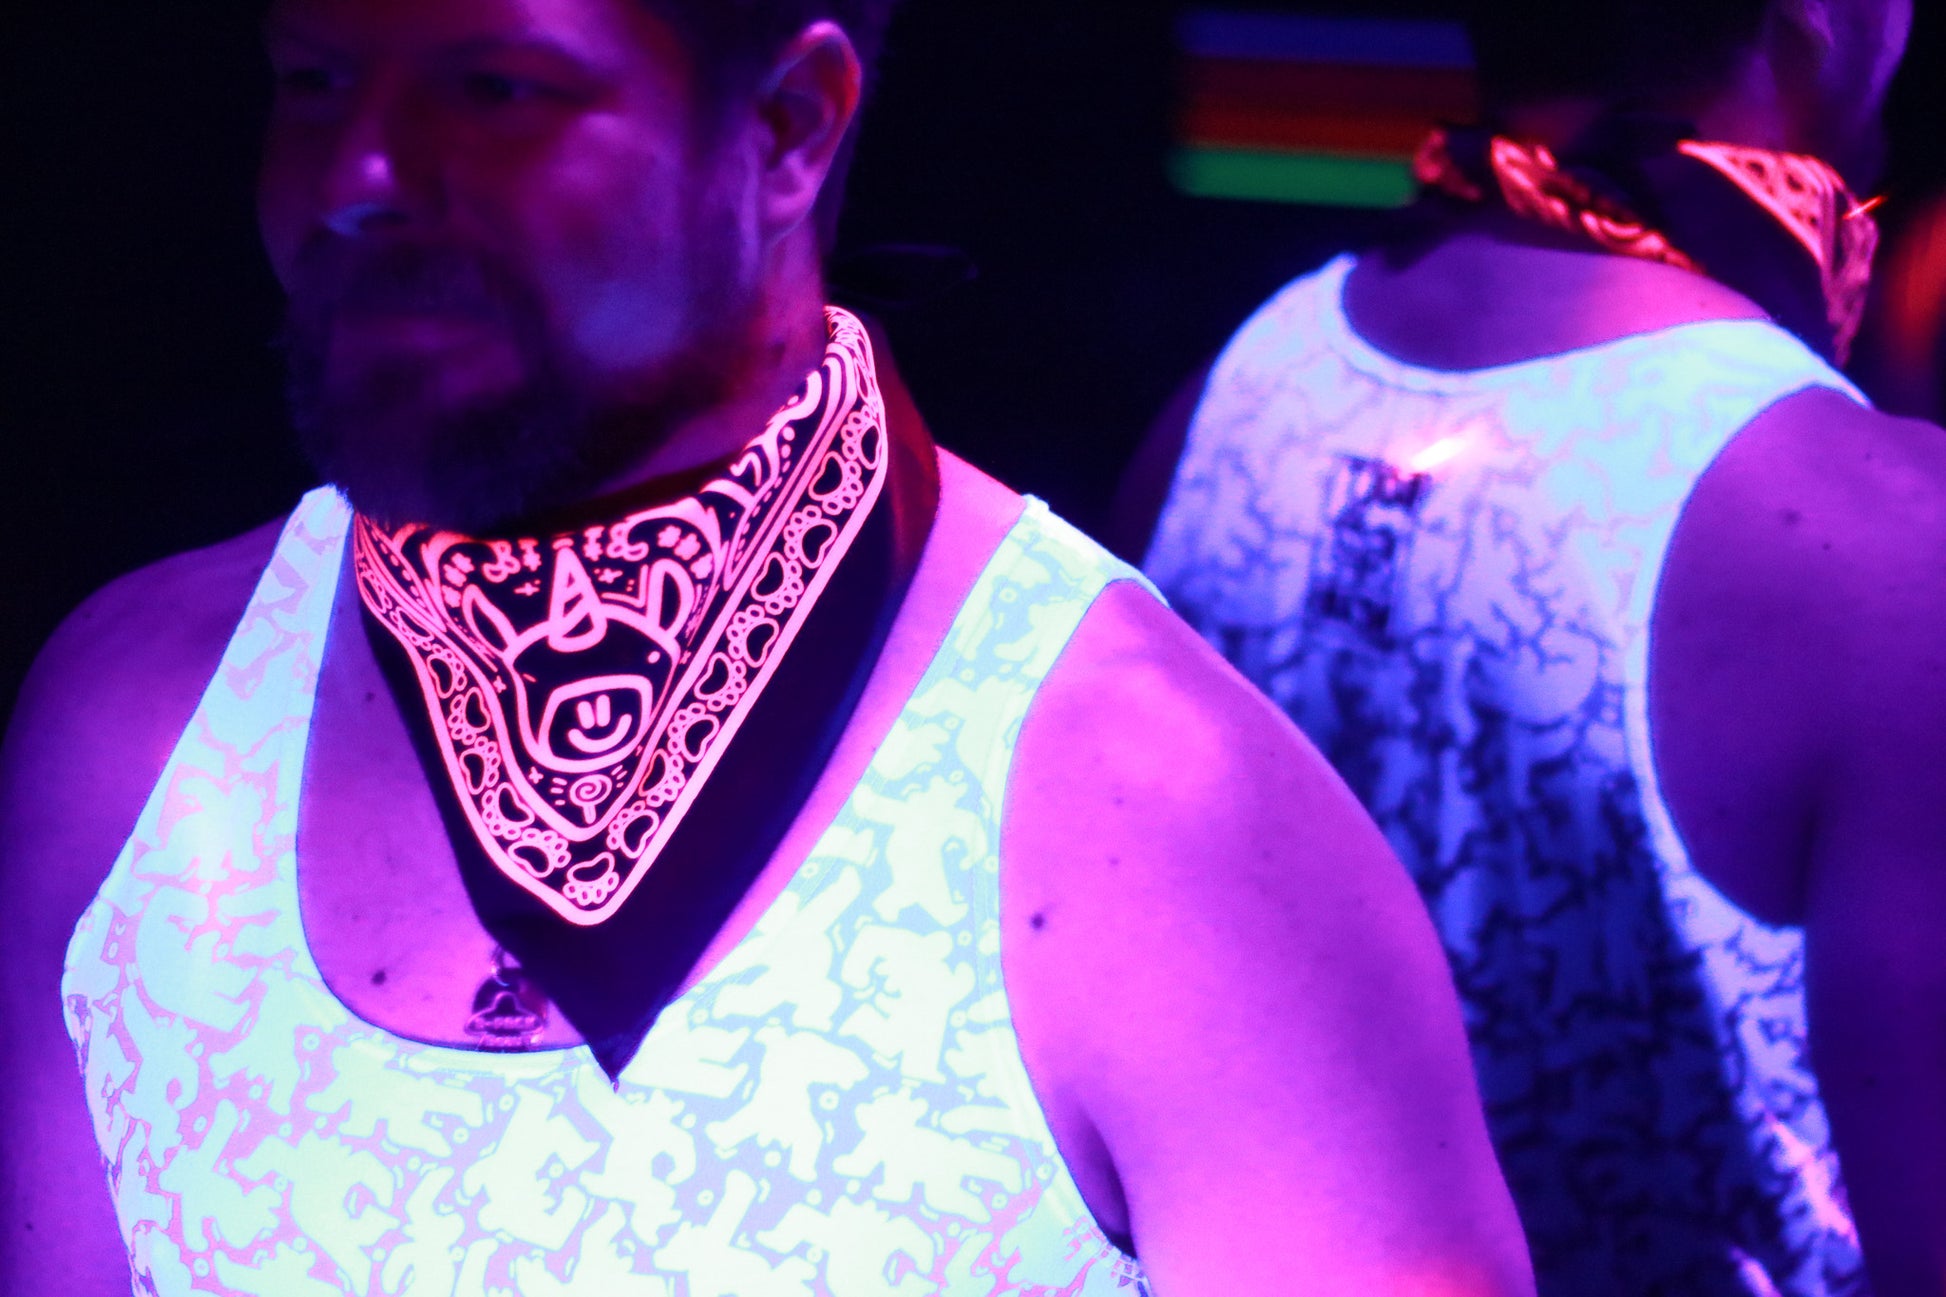 model in tank top wearing neon pink bandana featuring unicorn, lit by club lighting and black light.